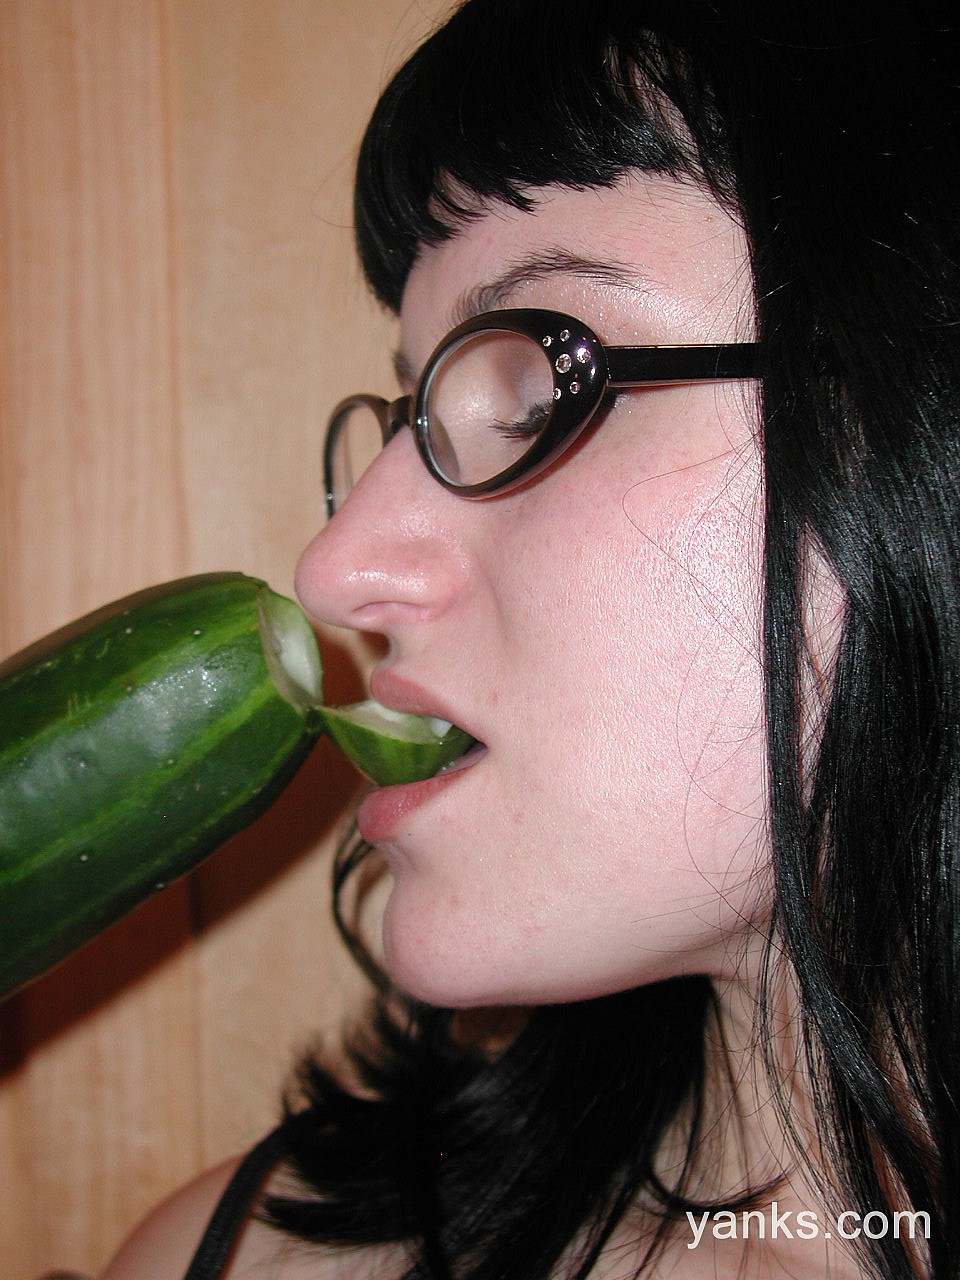 Black haired housewife with glasses Katrina plays with fat cucumber photo porno #427075824